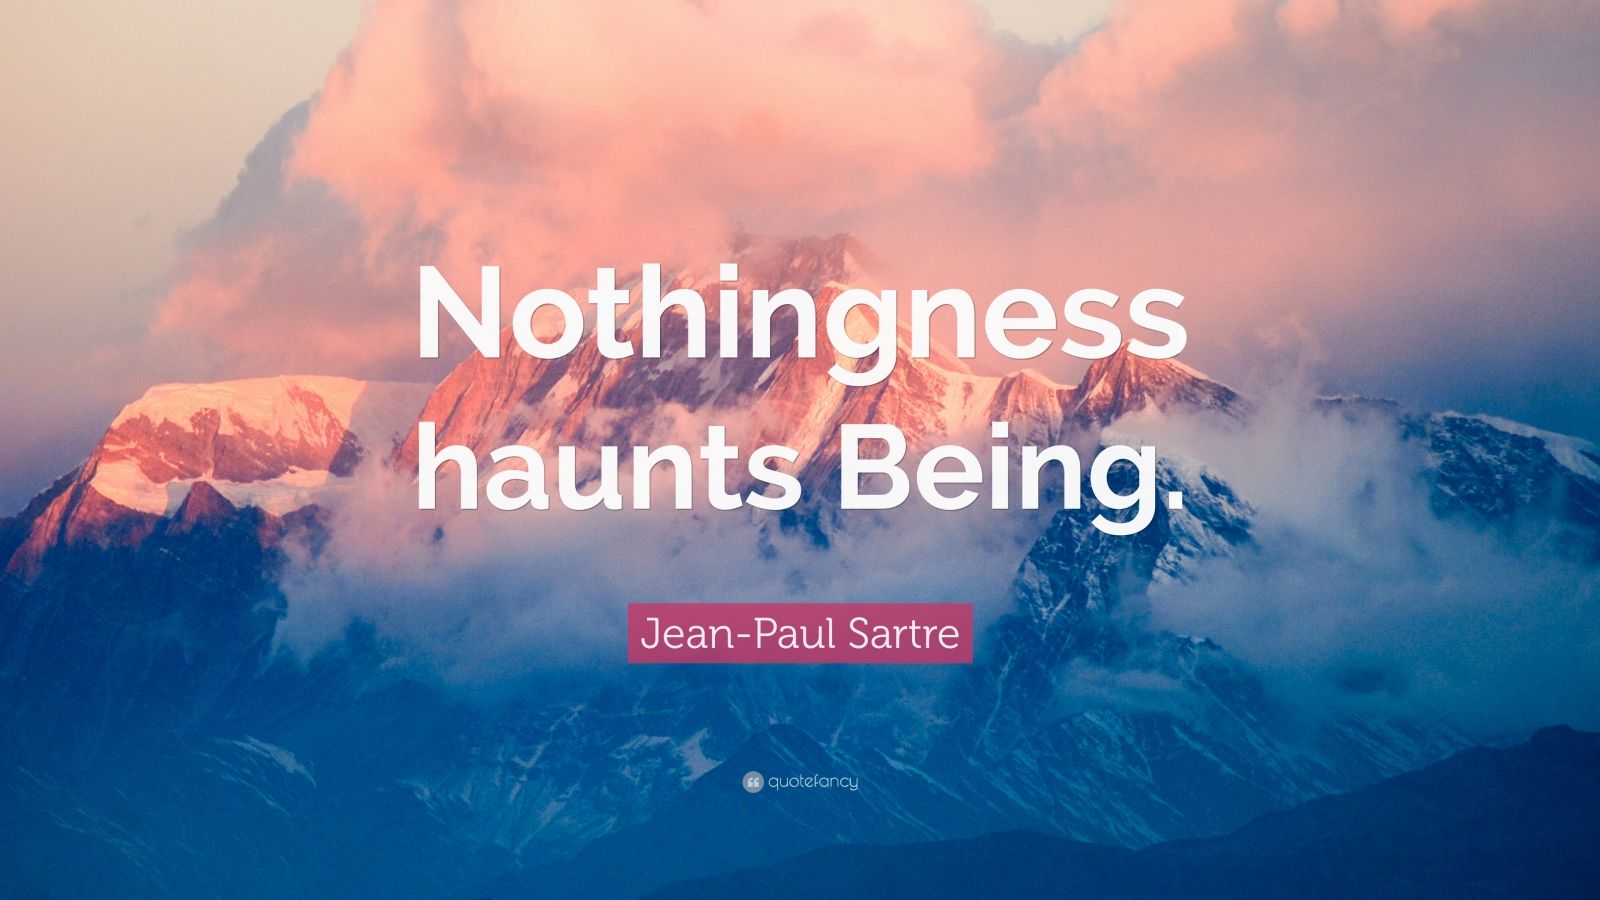 john paul sartre being and nothingness